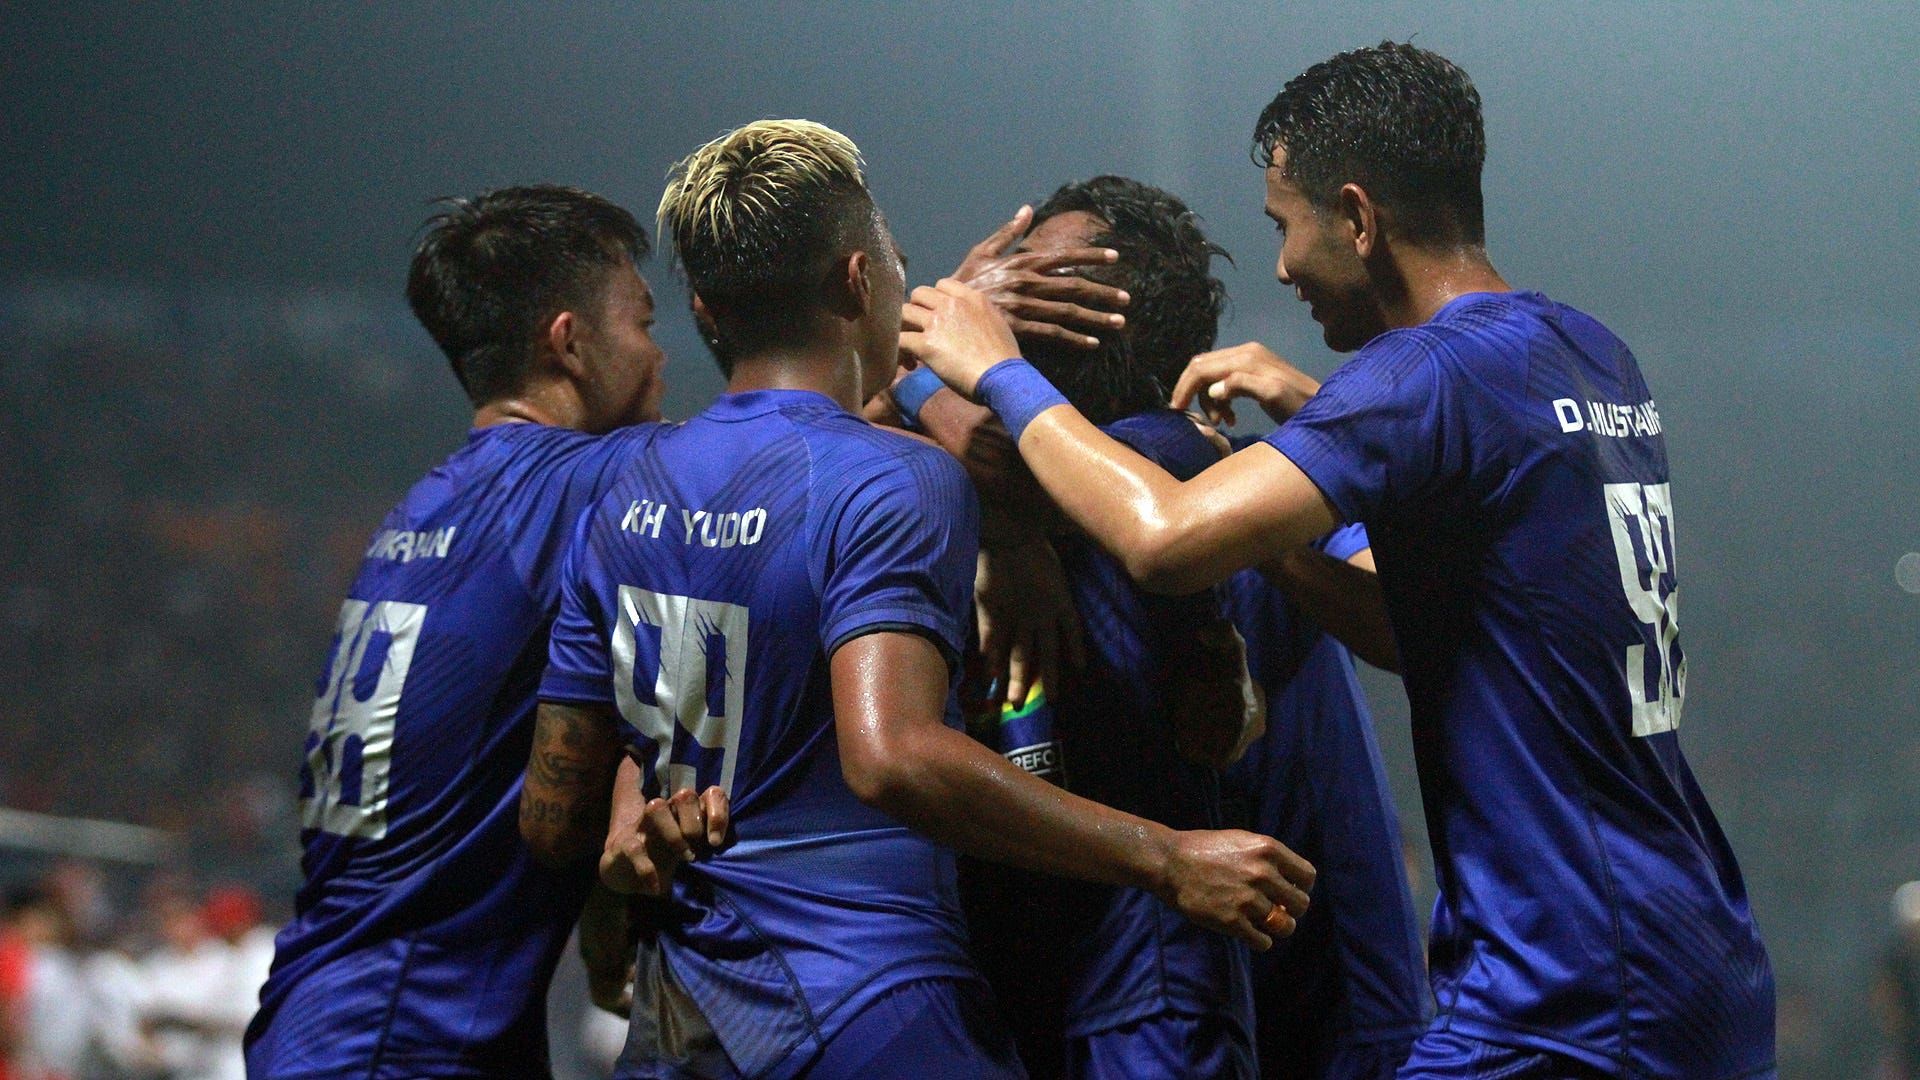 Arema vs Persikabo 1973 Prediction, Betting Tips and Odds | 19 MARCH, 2023